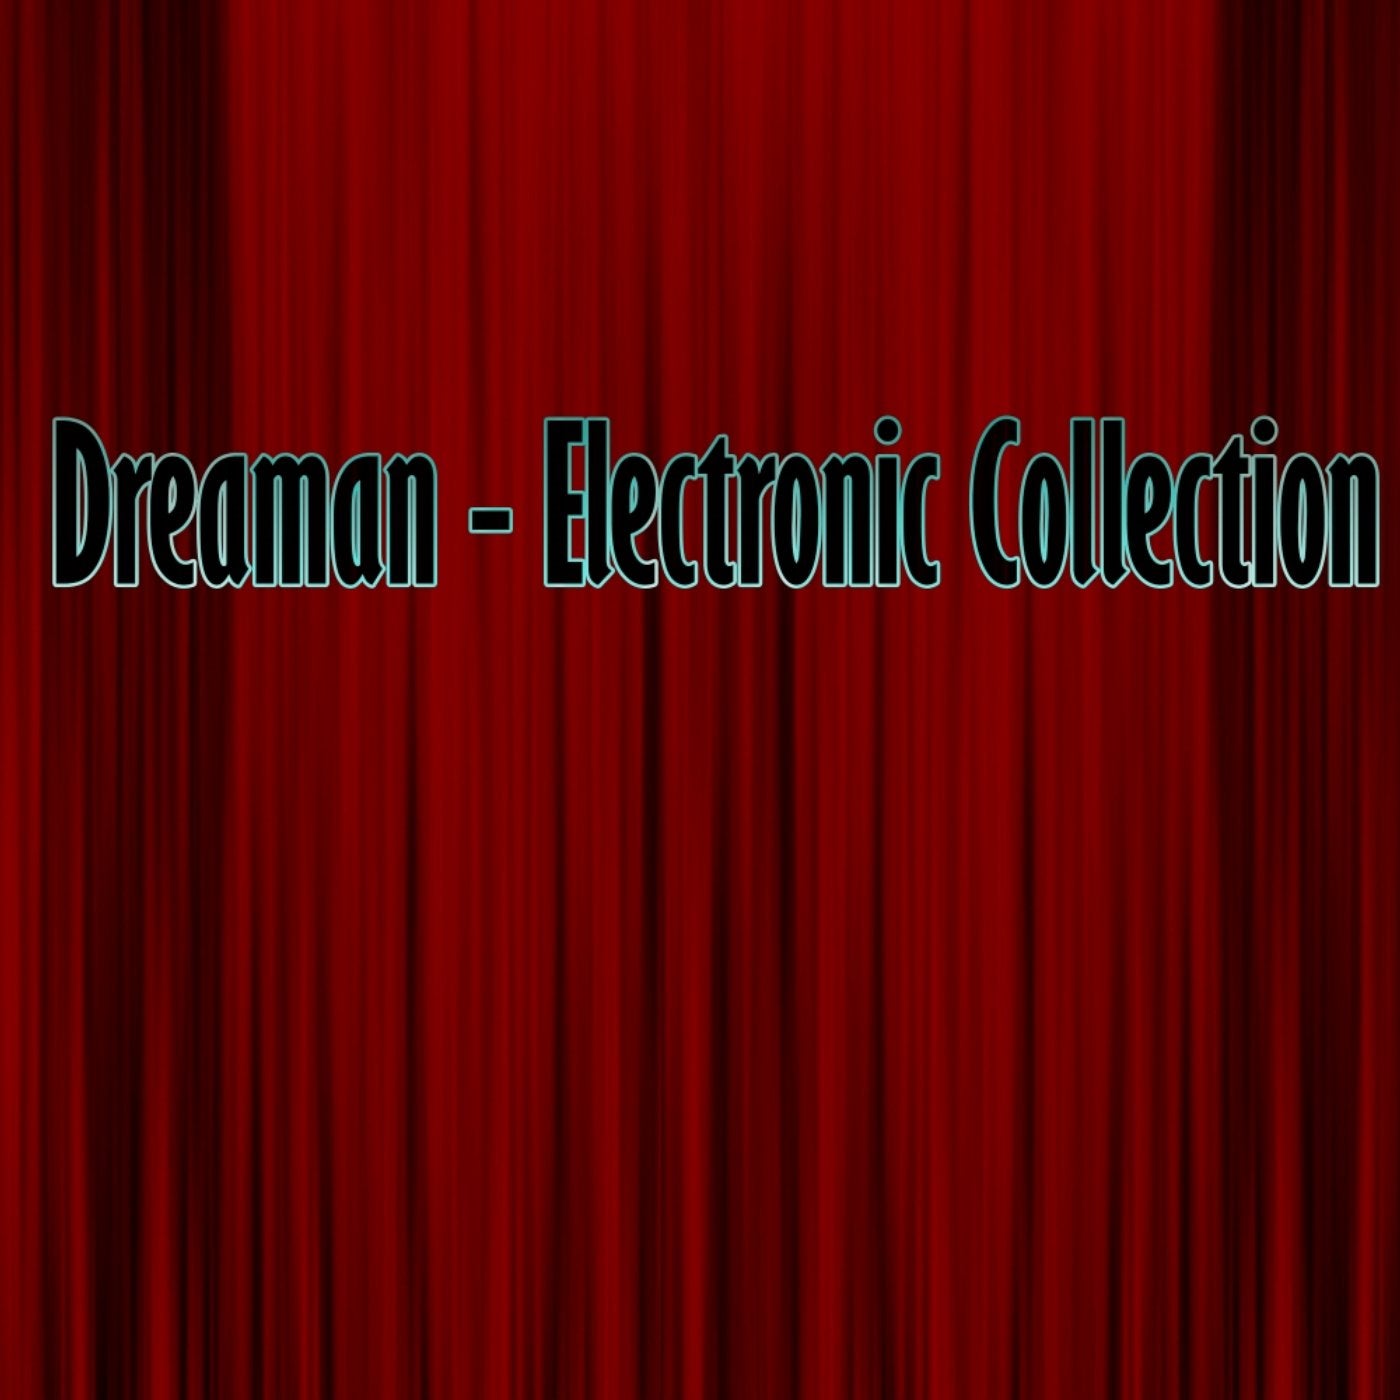 Electronic Collection